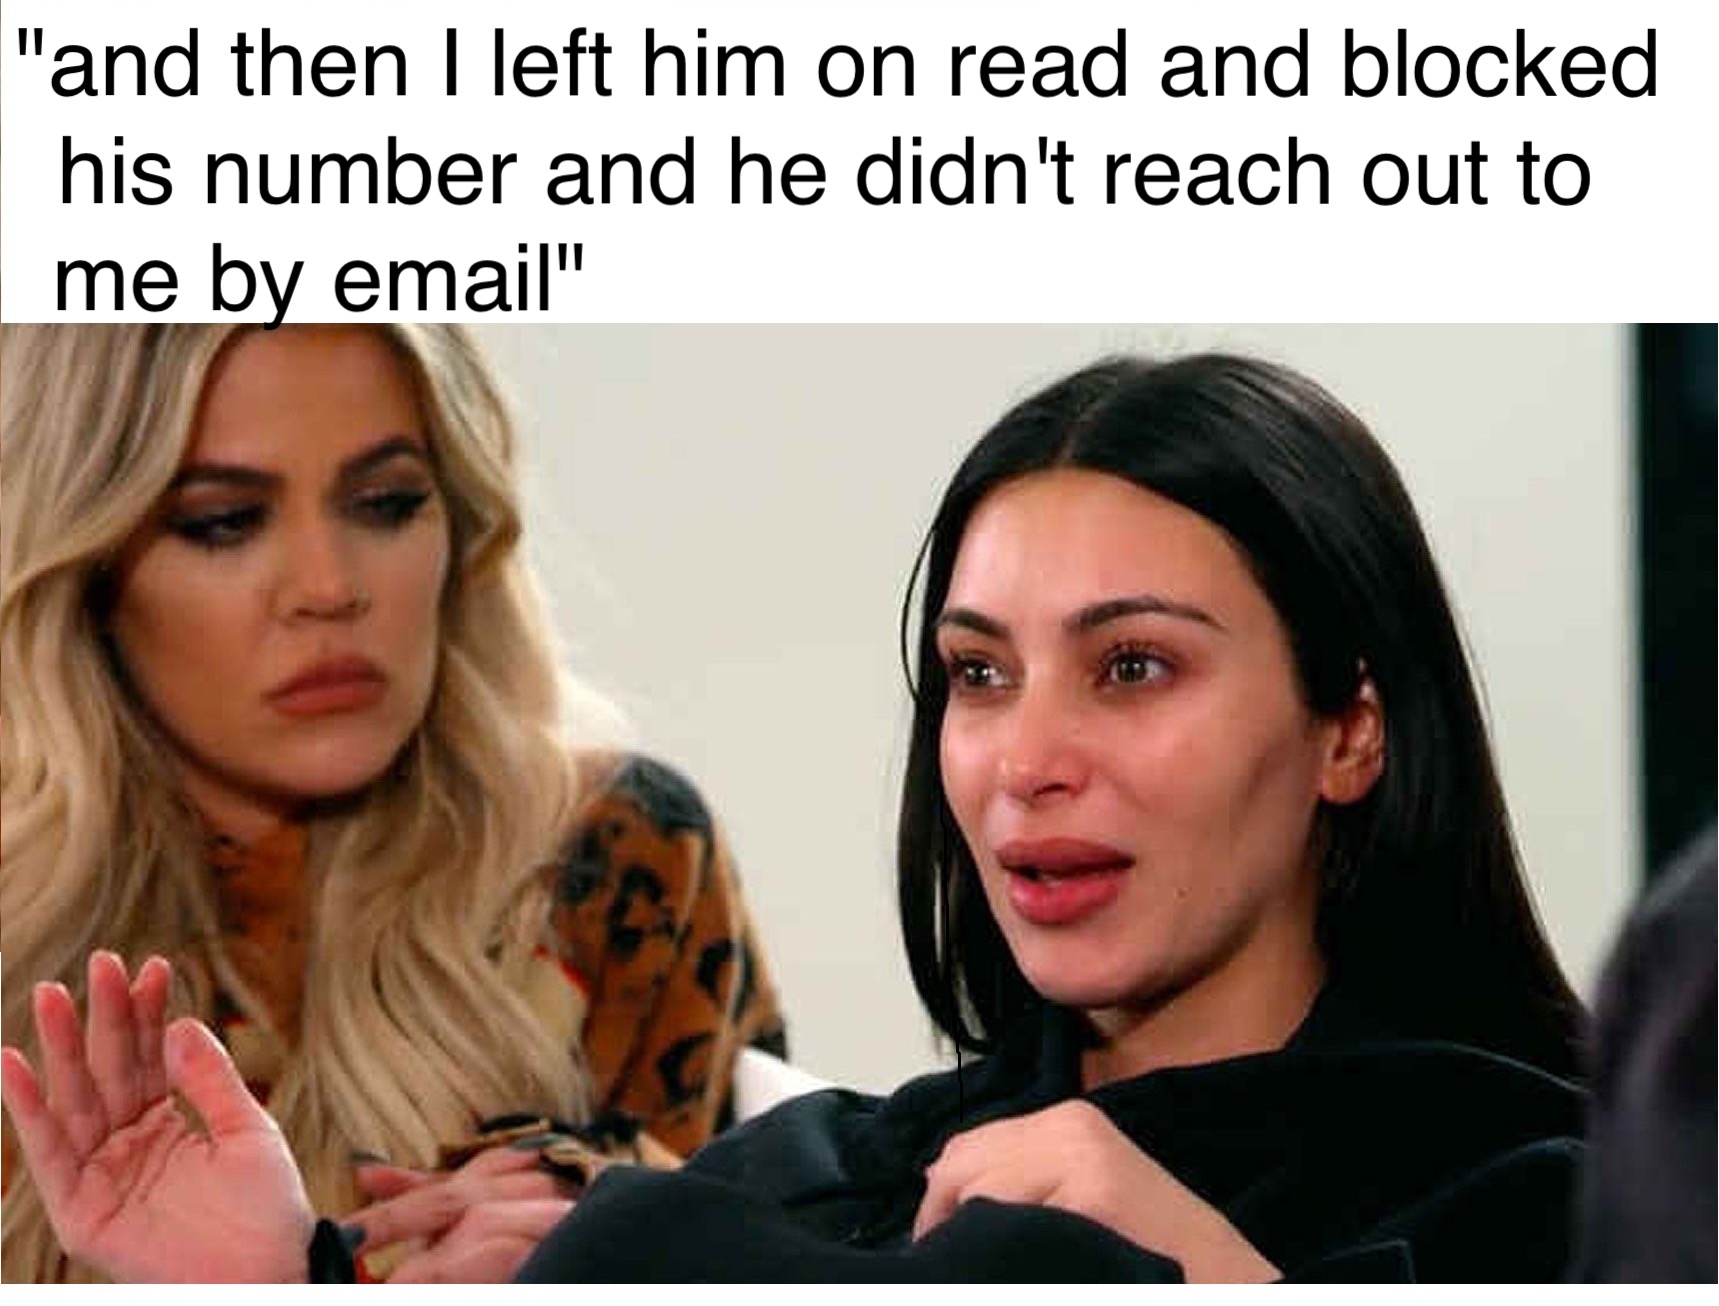 memes - kim kardashian paris robbery - "and then I left him on read and blocked his number and he didn't reach out to me by email"